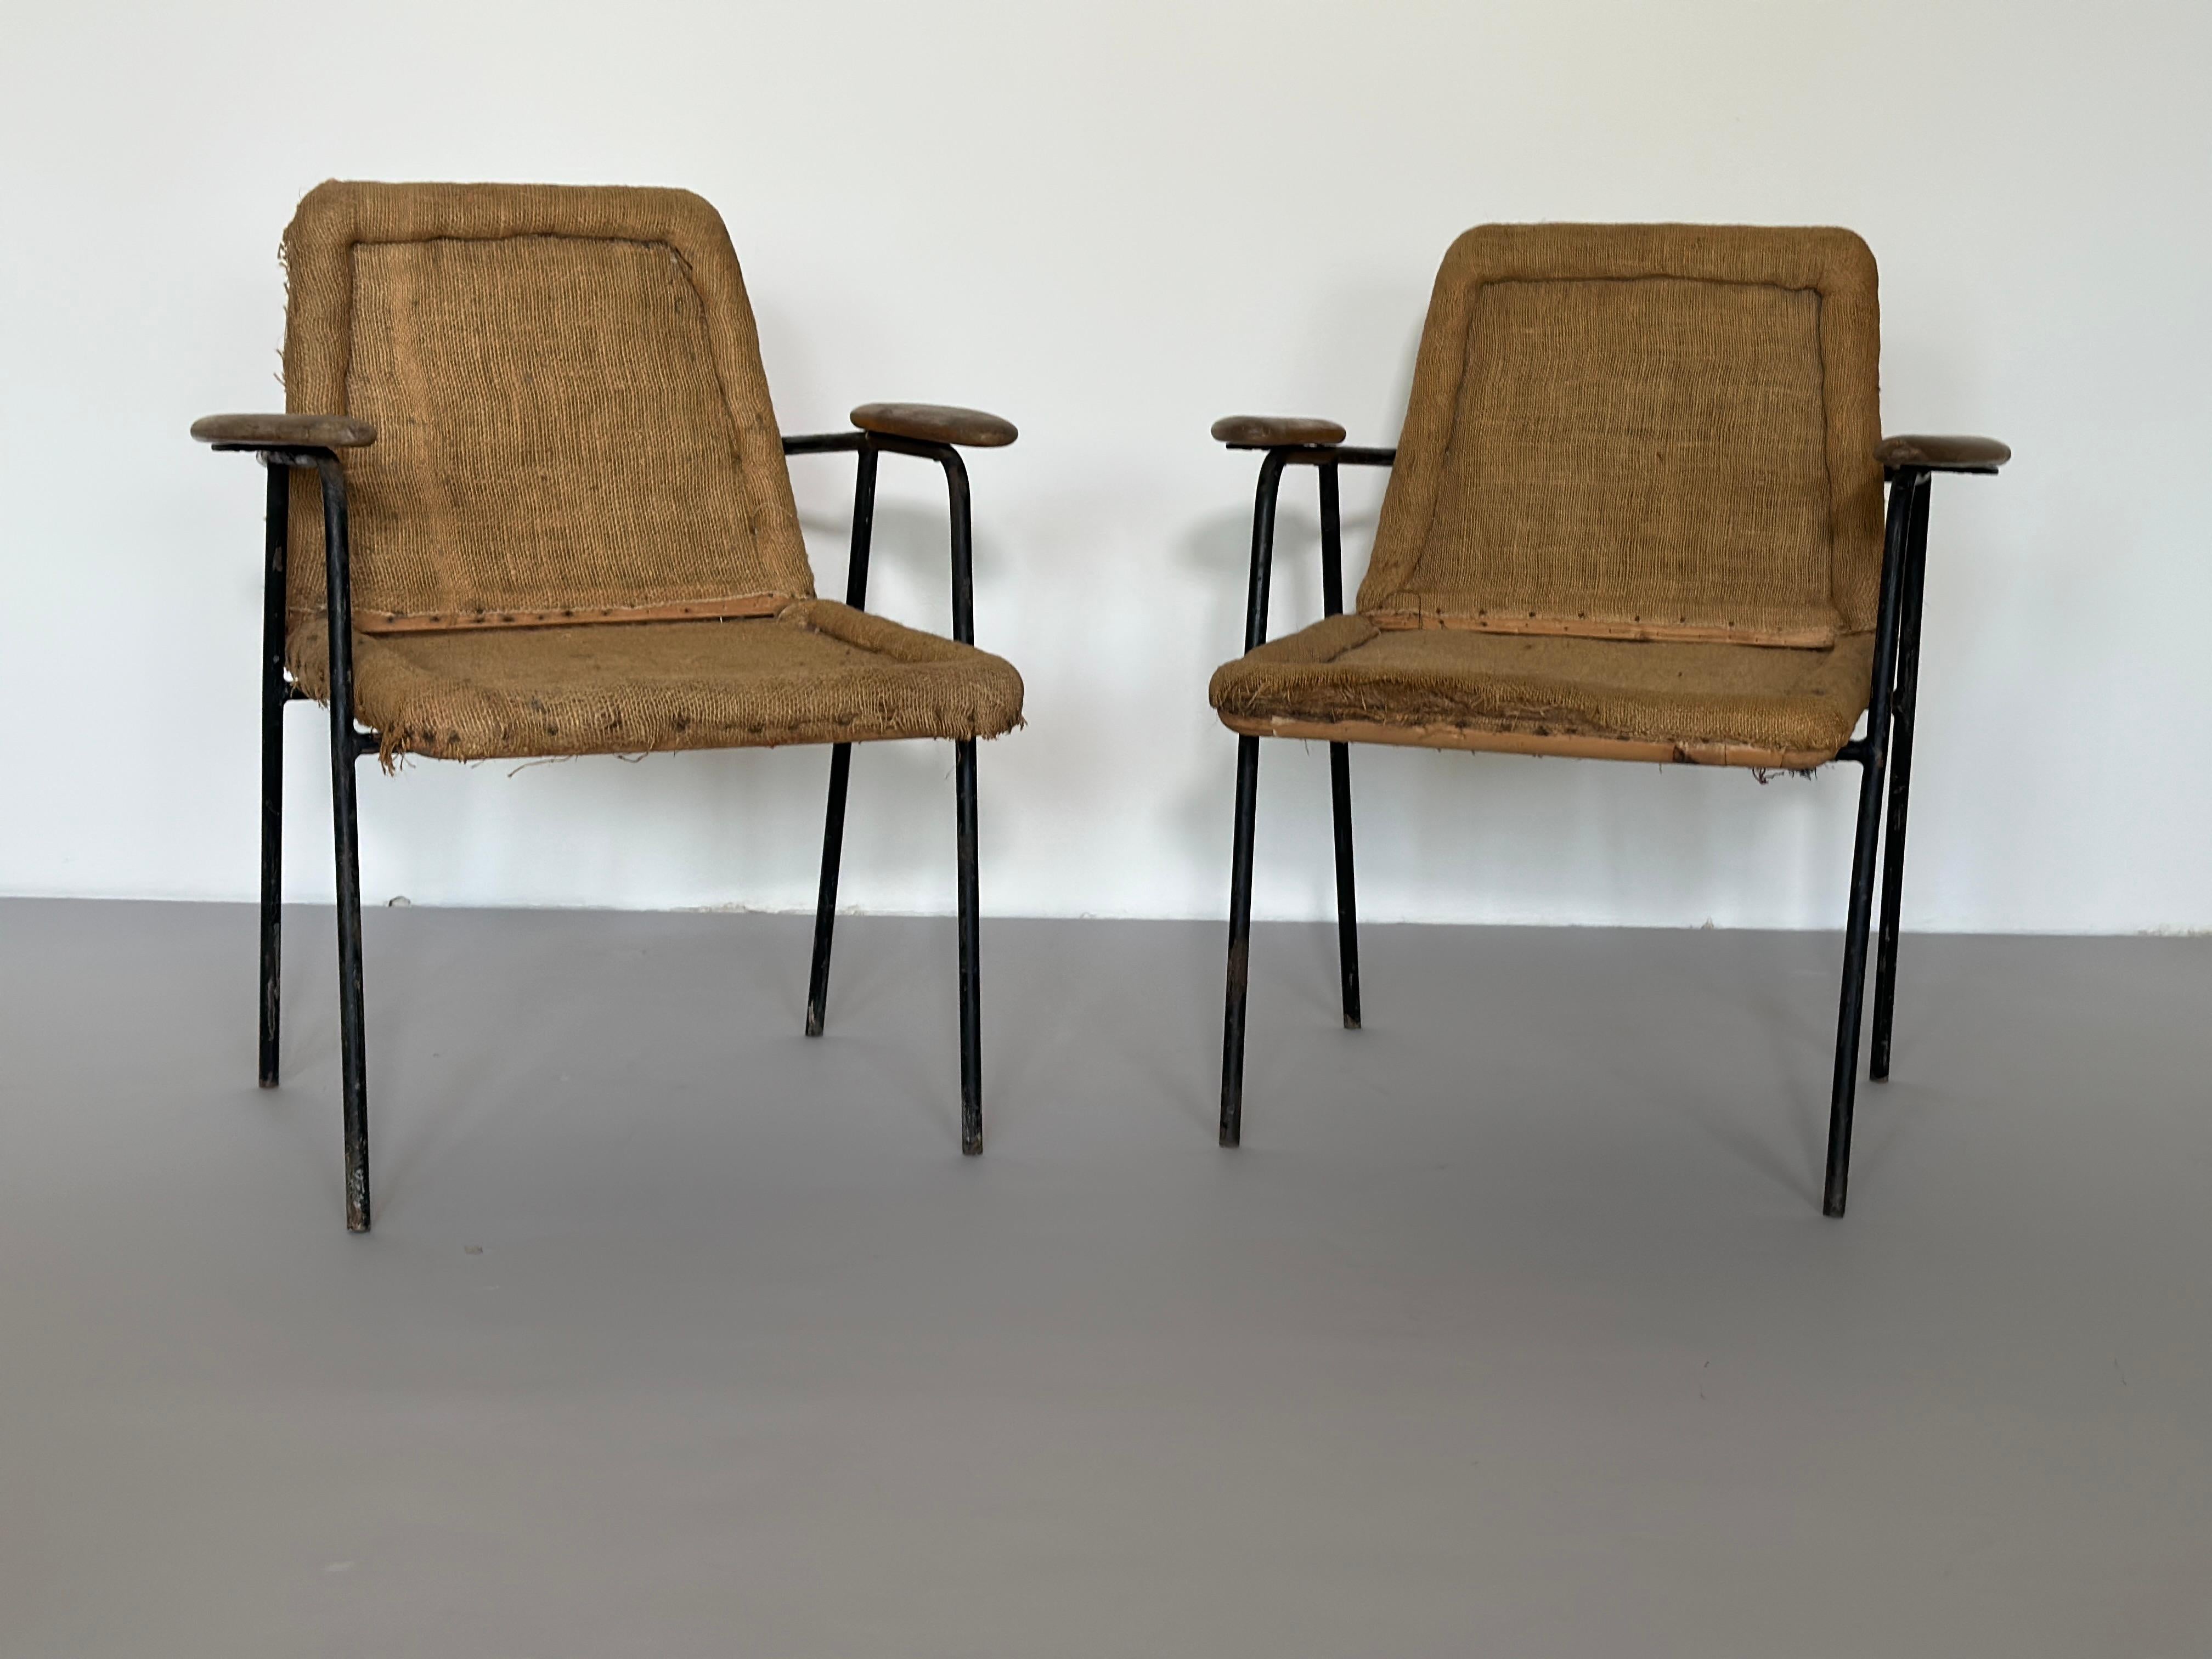 Set of two French armchair in original condition in style of Jackues Hitier 1950s.